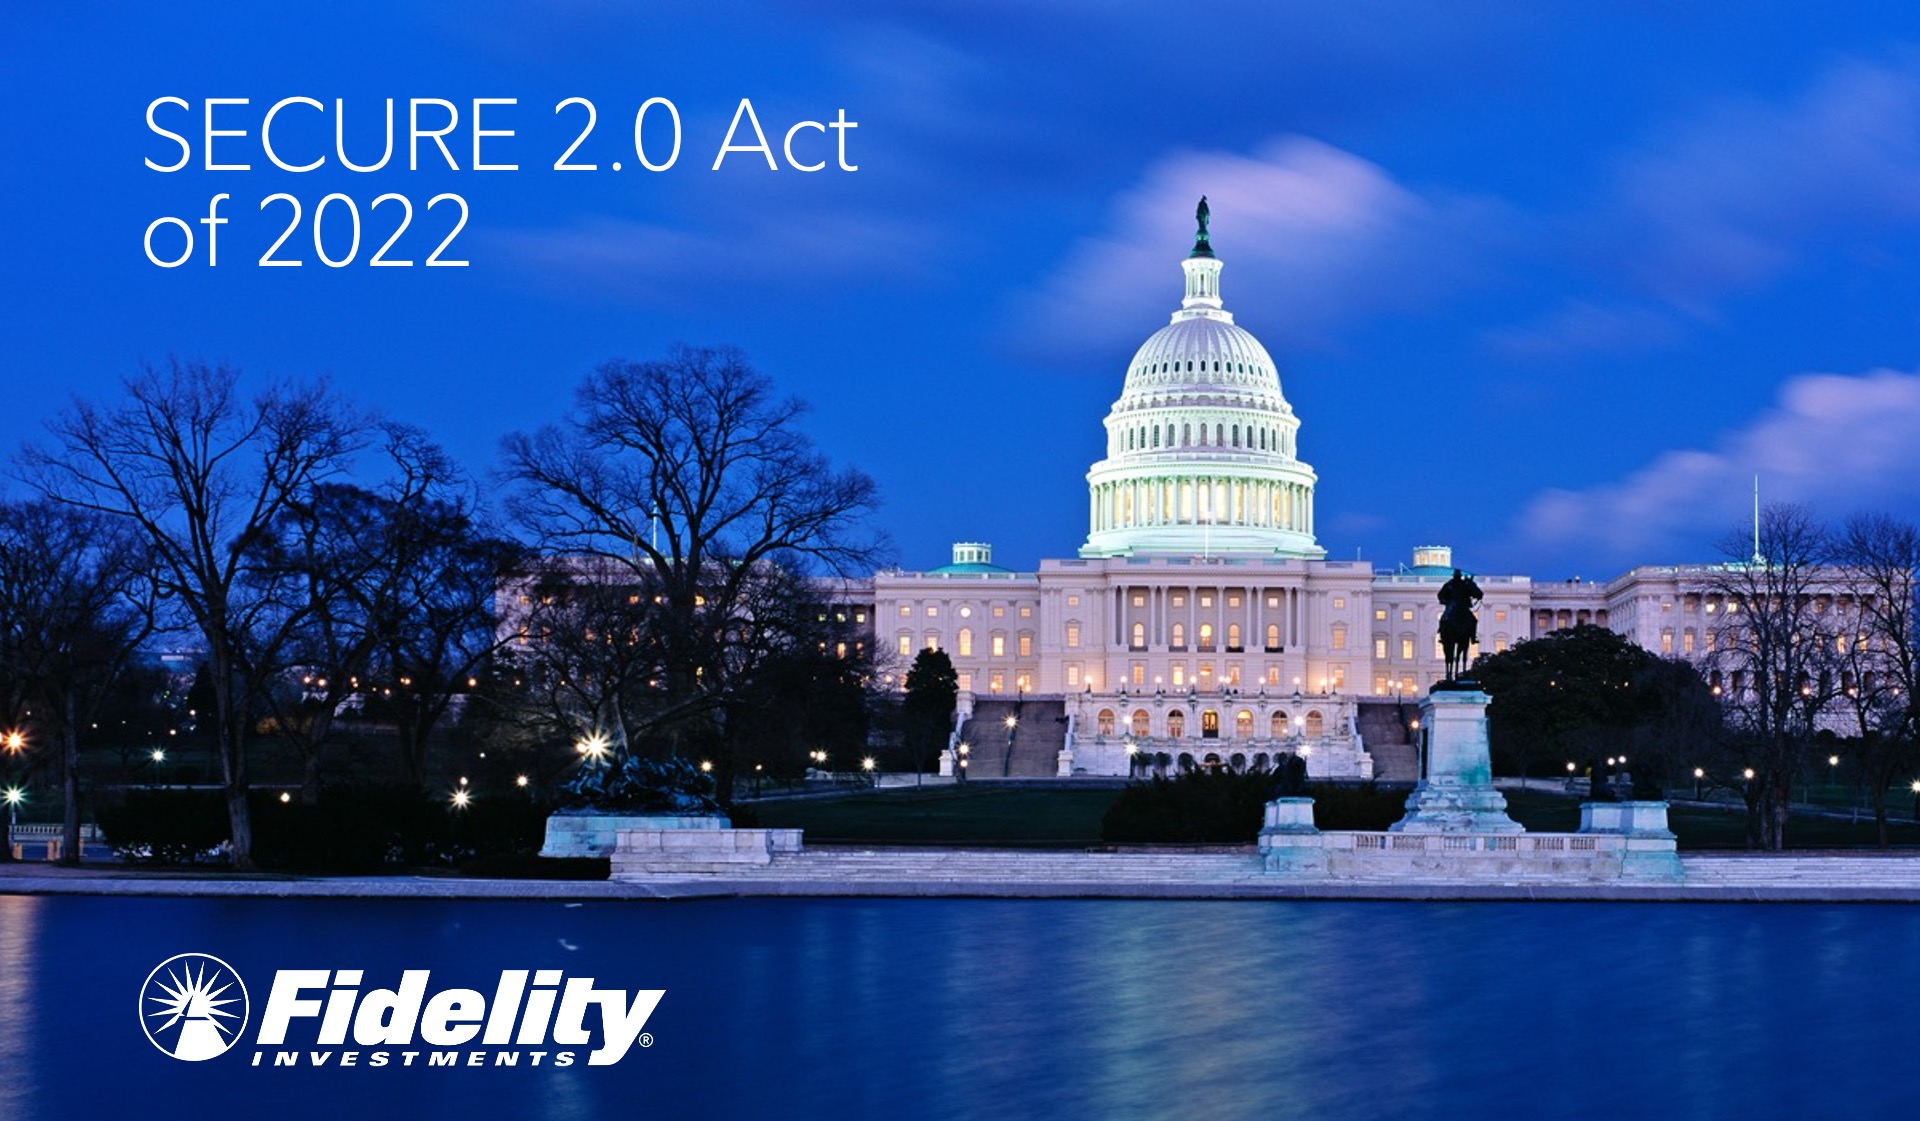 The SECURE 2.0 ACT of 2022